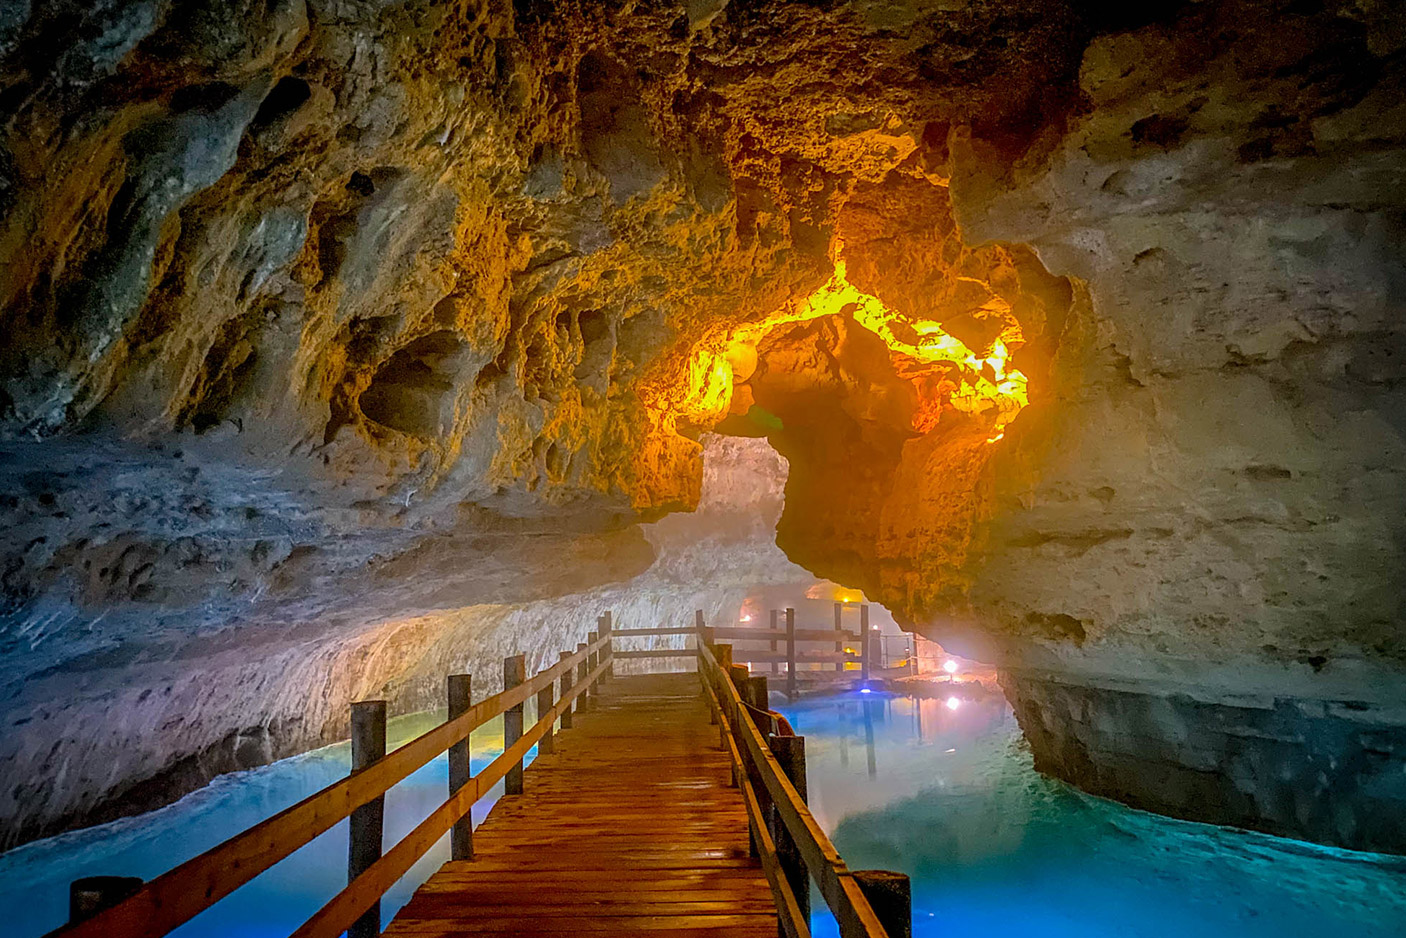 walkway through the cave with water on sides